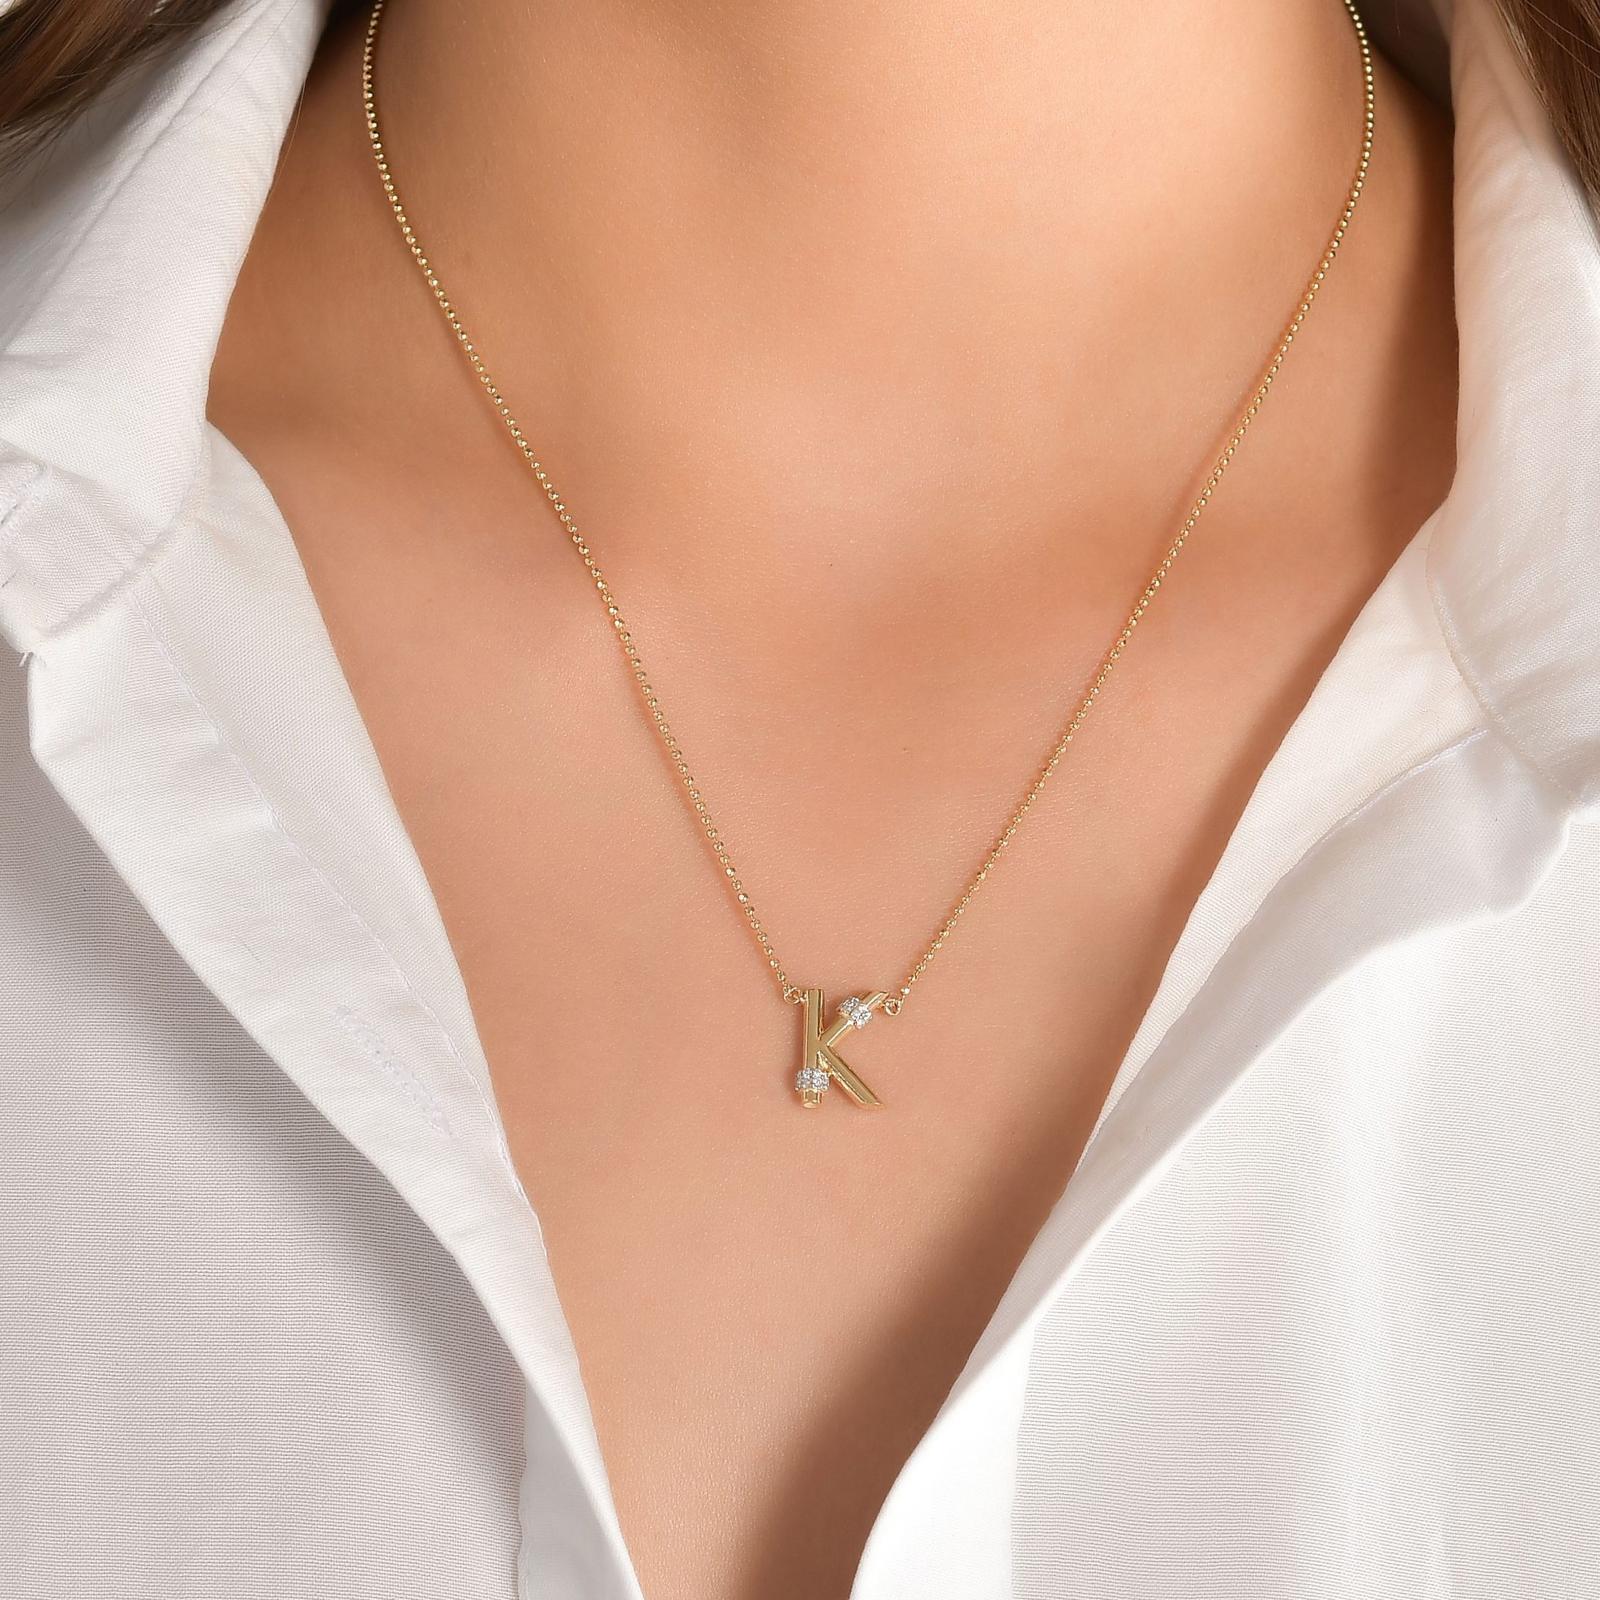 Sophisticated Diamond K Letter Charm Featuring Brilliant-cut Diamonds and a 14K Yellow Gold

Round Diamond: 0,08ct	
Color: E	
Clairty: SI
14K Gold: 4.28Gr.